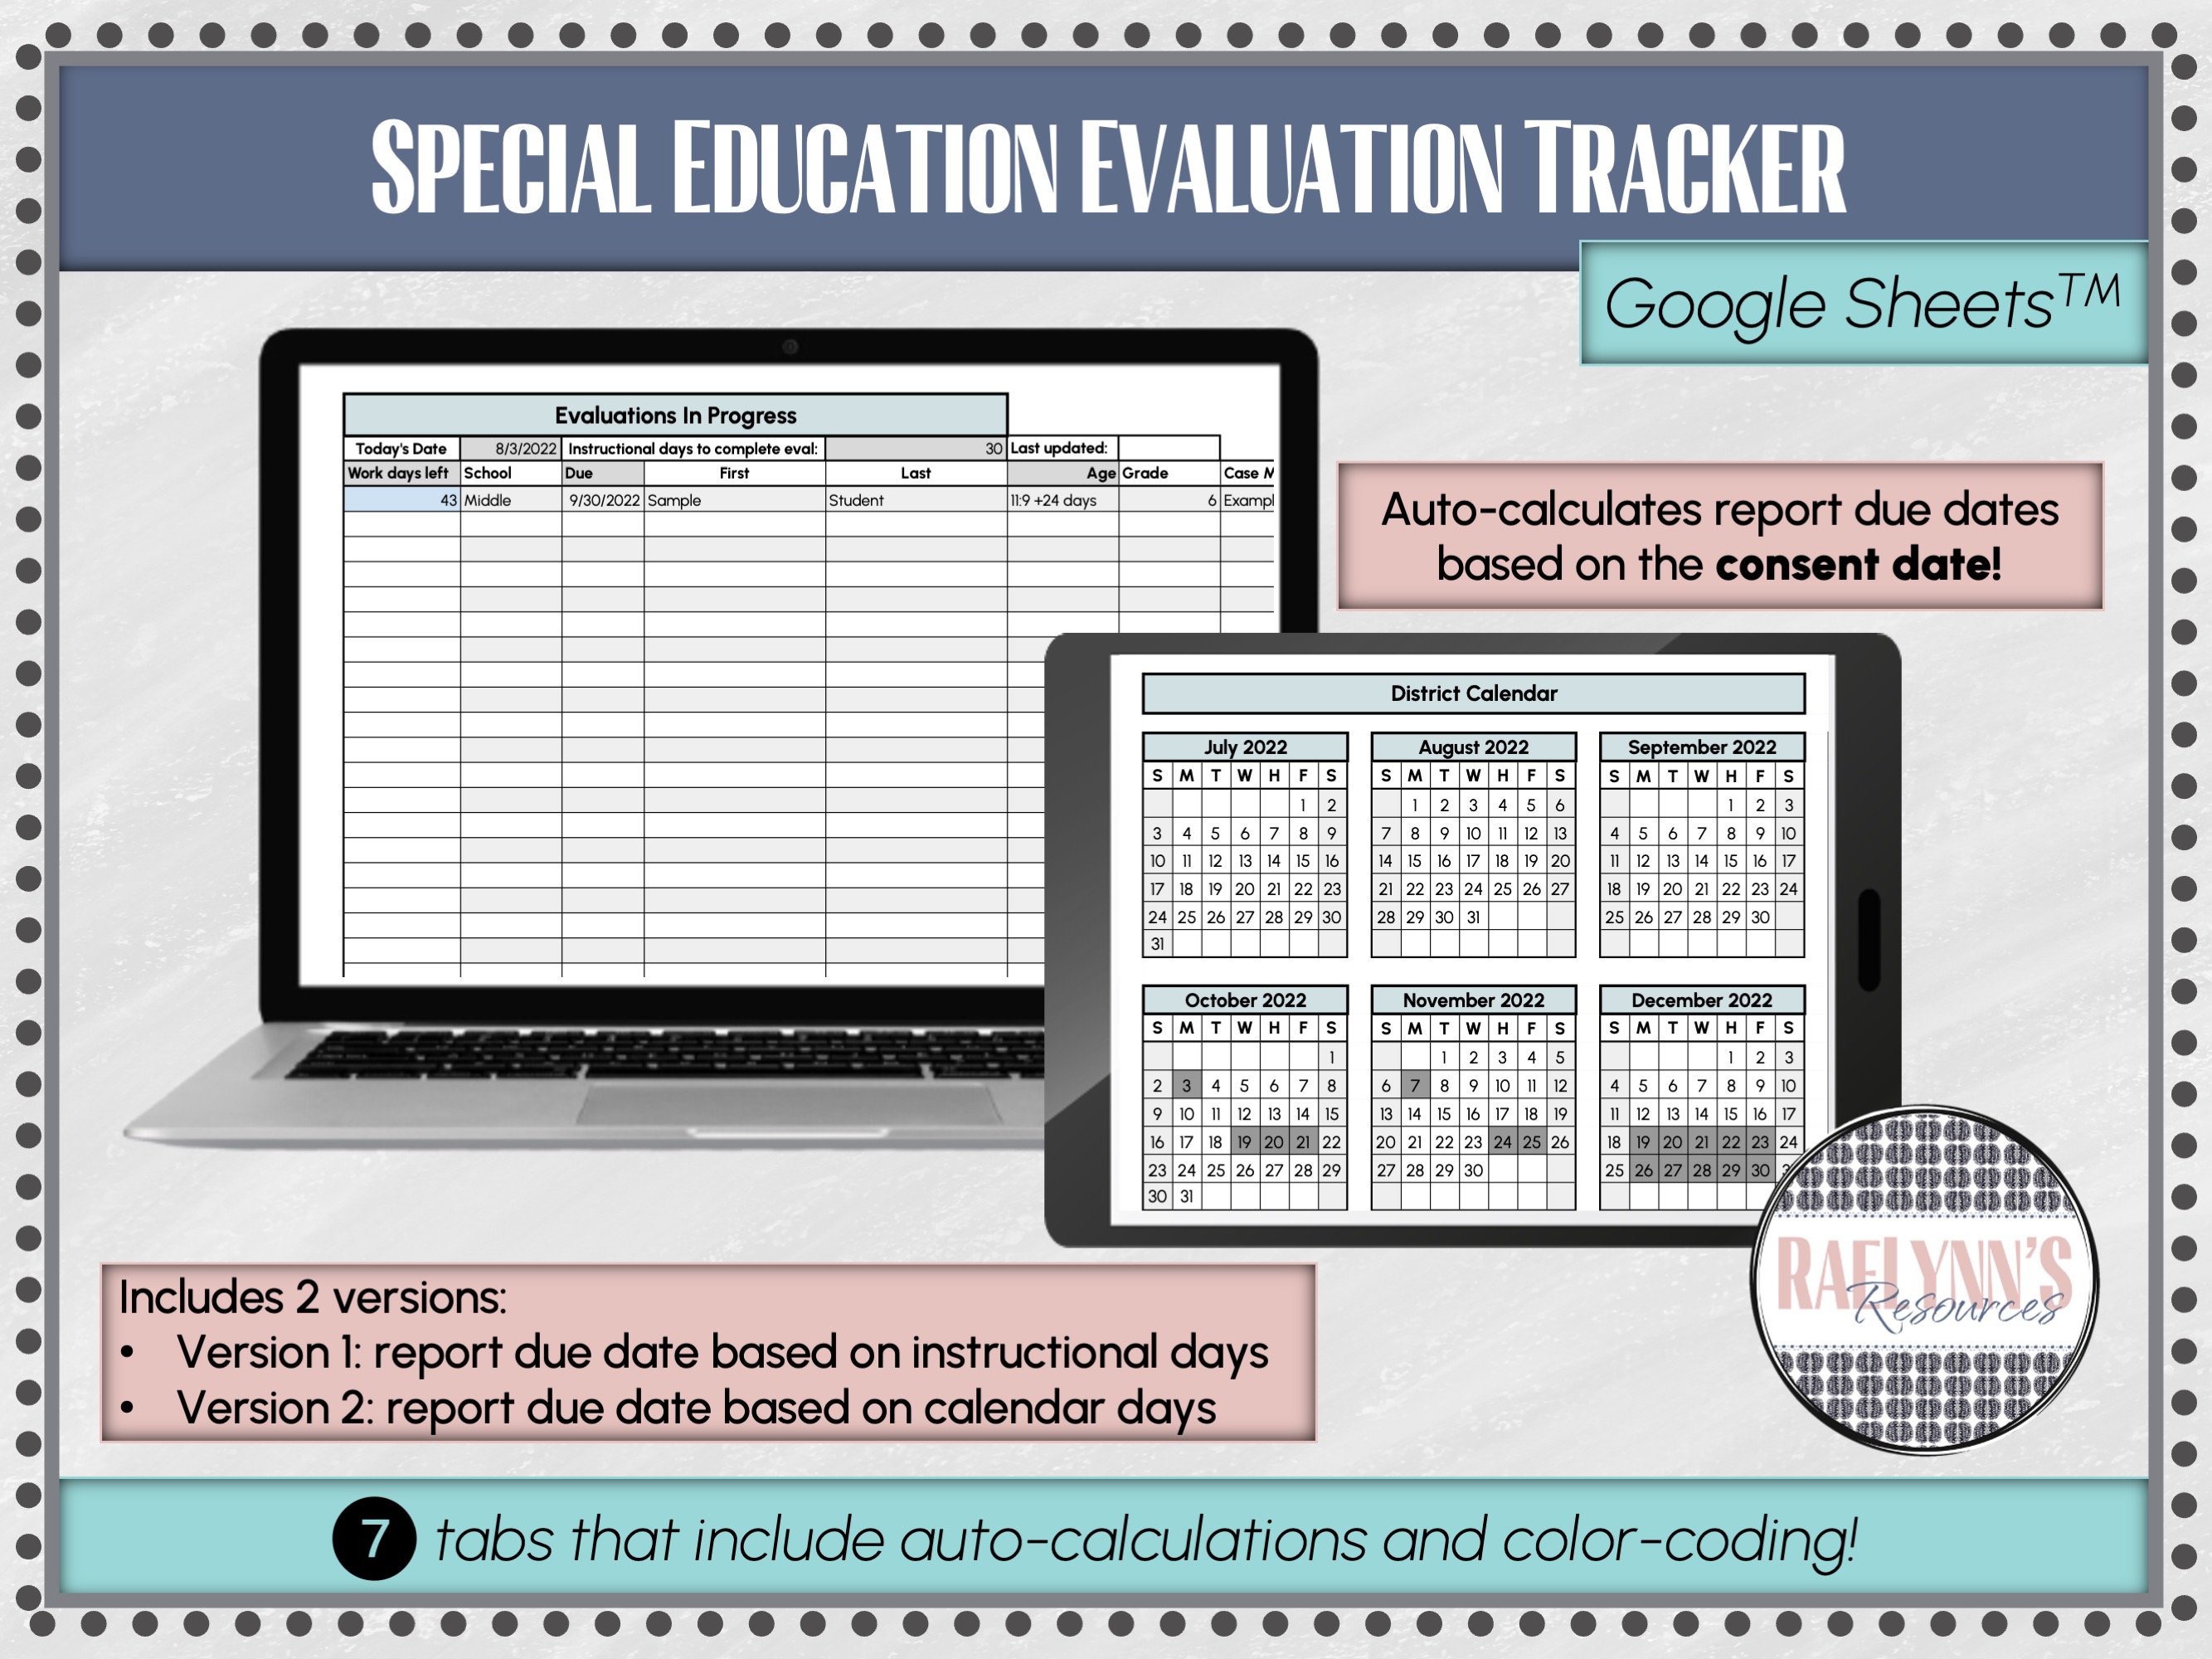 Special Education Evaluation Tracker for Google Sheets